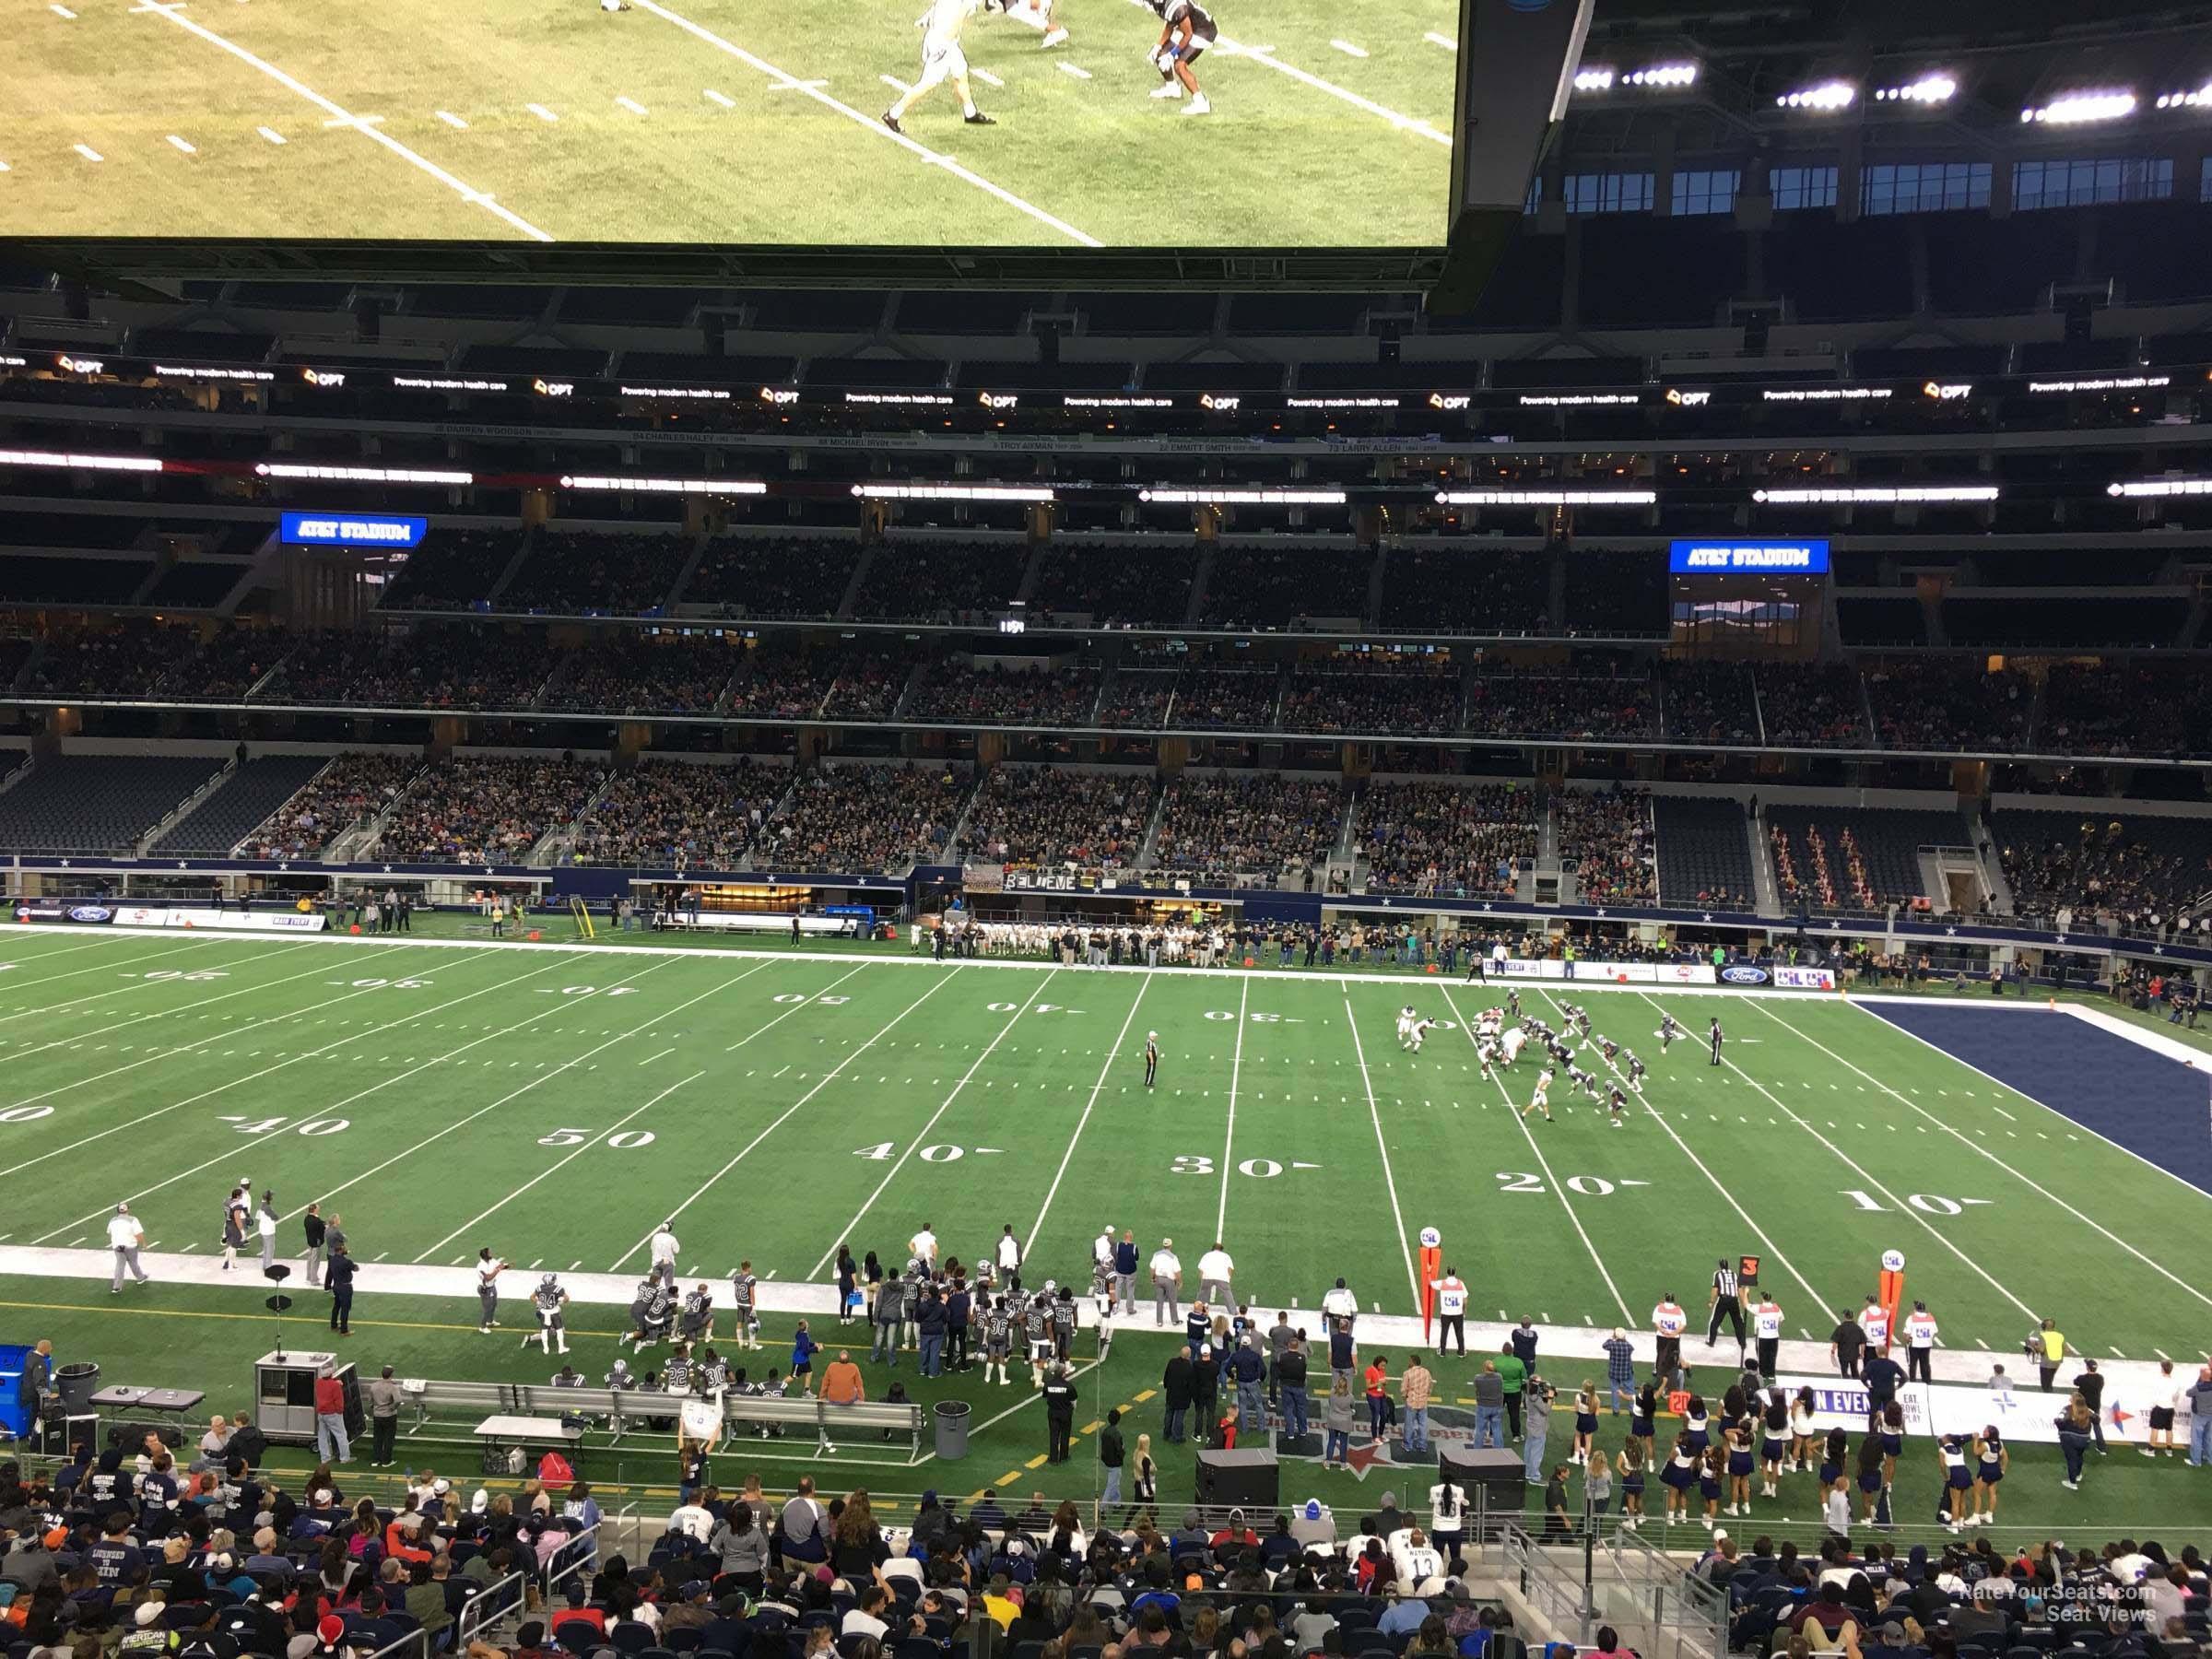 section c208, row 4 seat view  for football - at&t stadium (cowboys stadium)